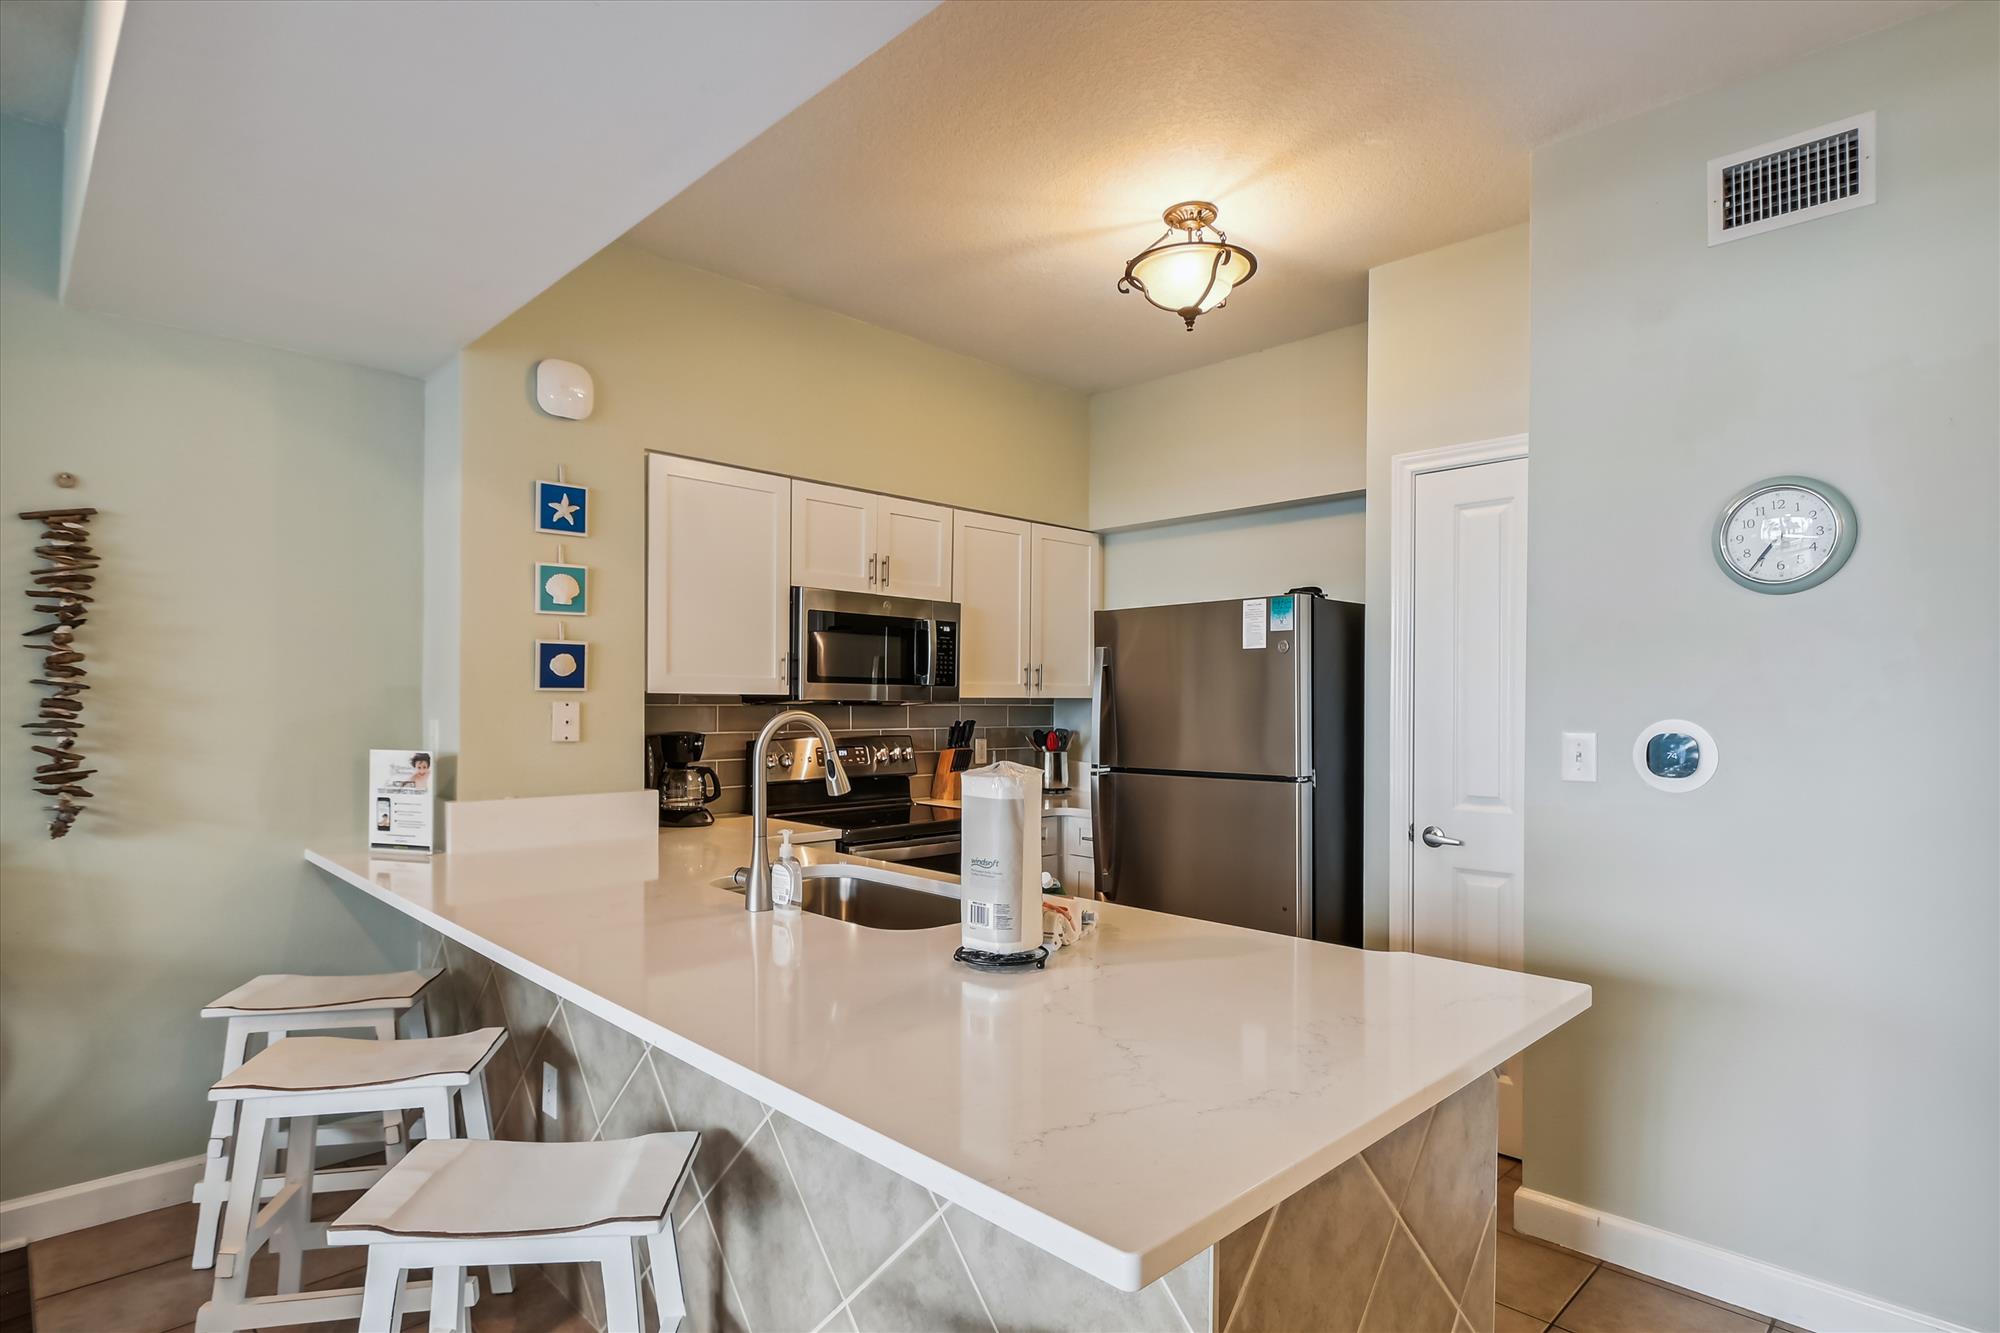 The kitchen in one of our VRBO rentals in Panama City Beach